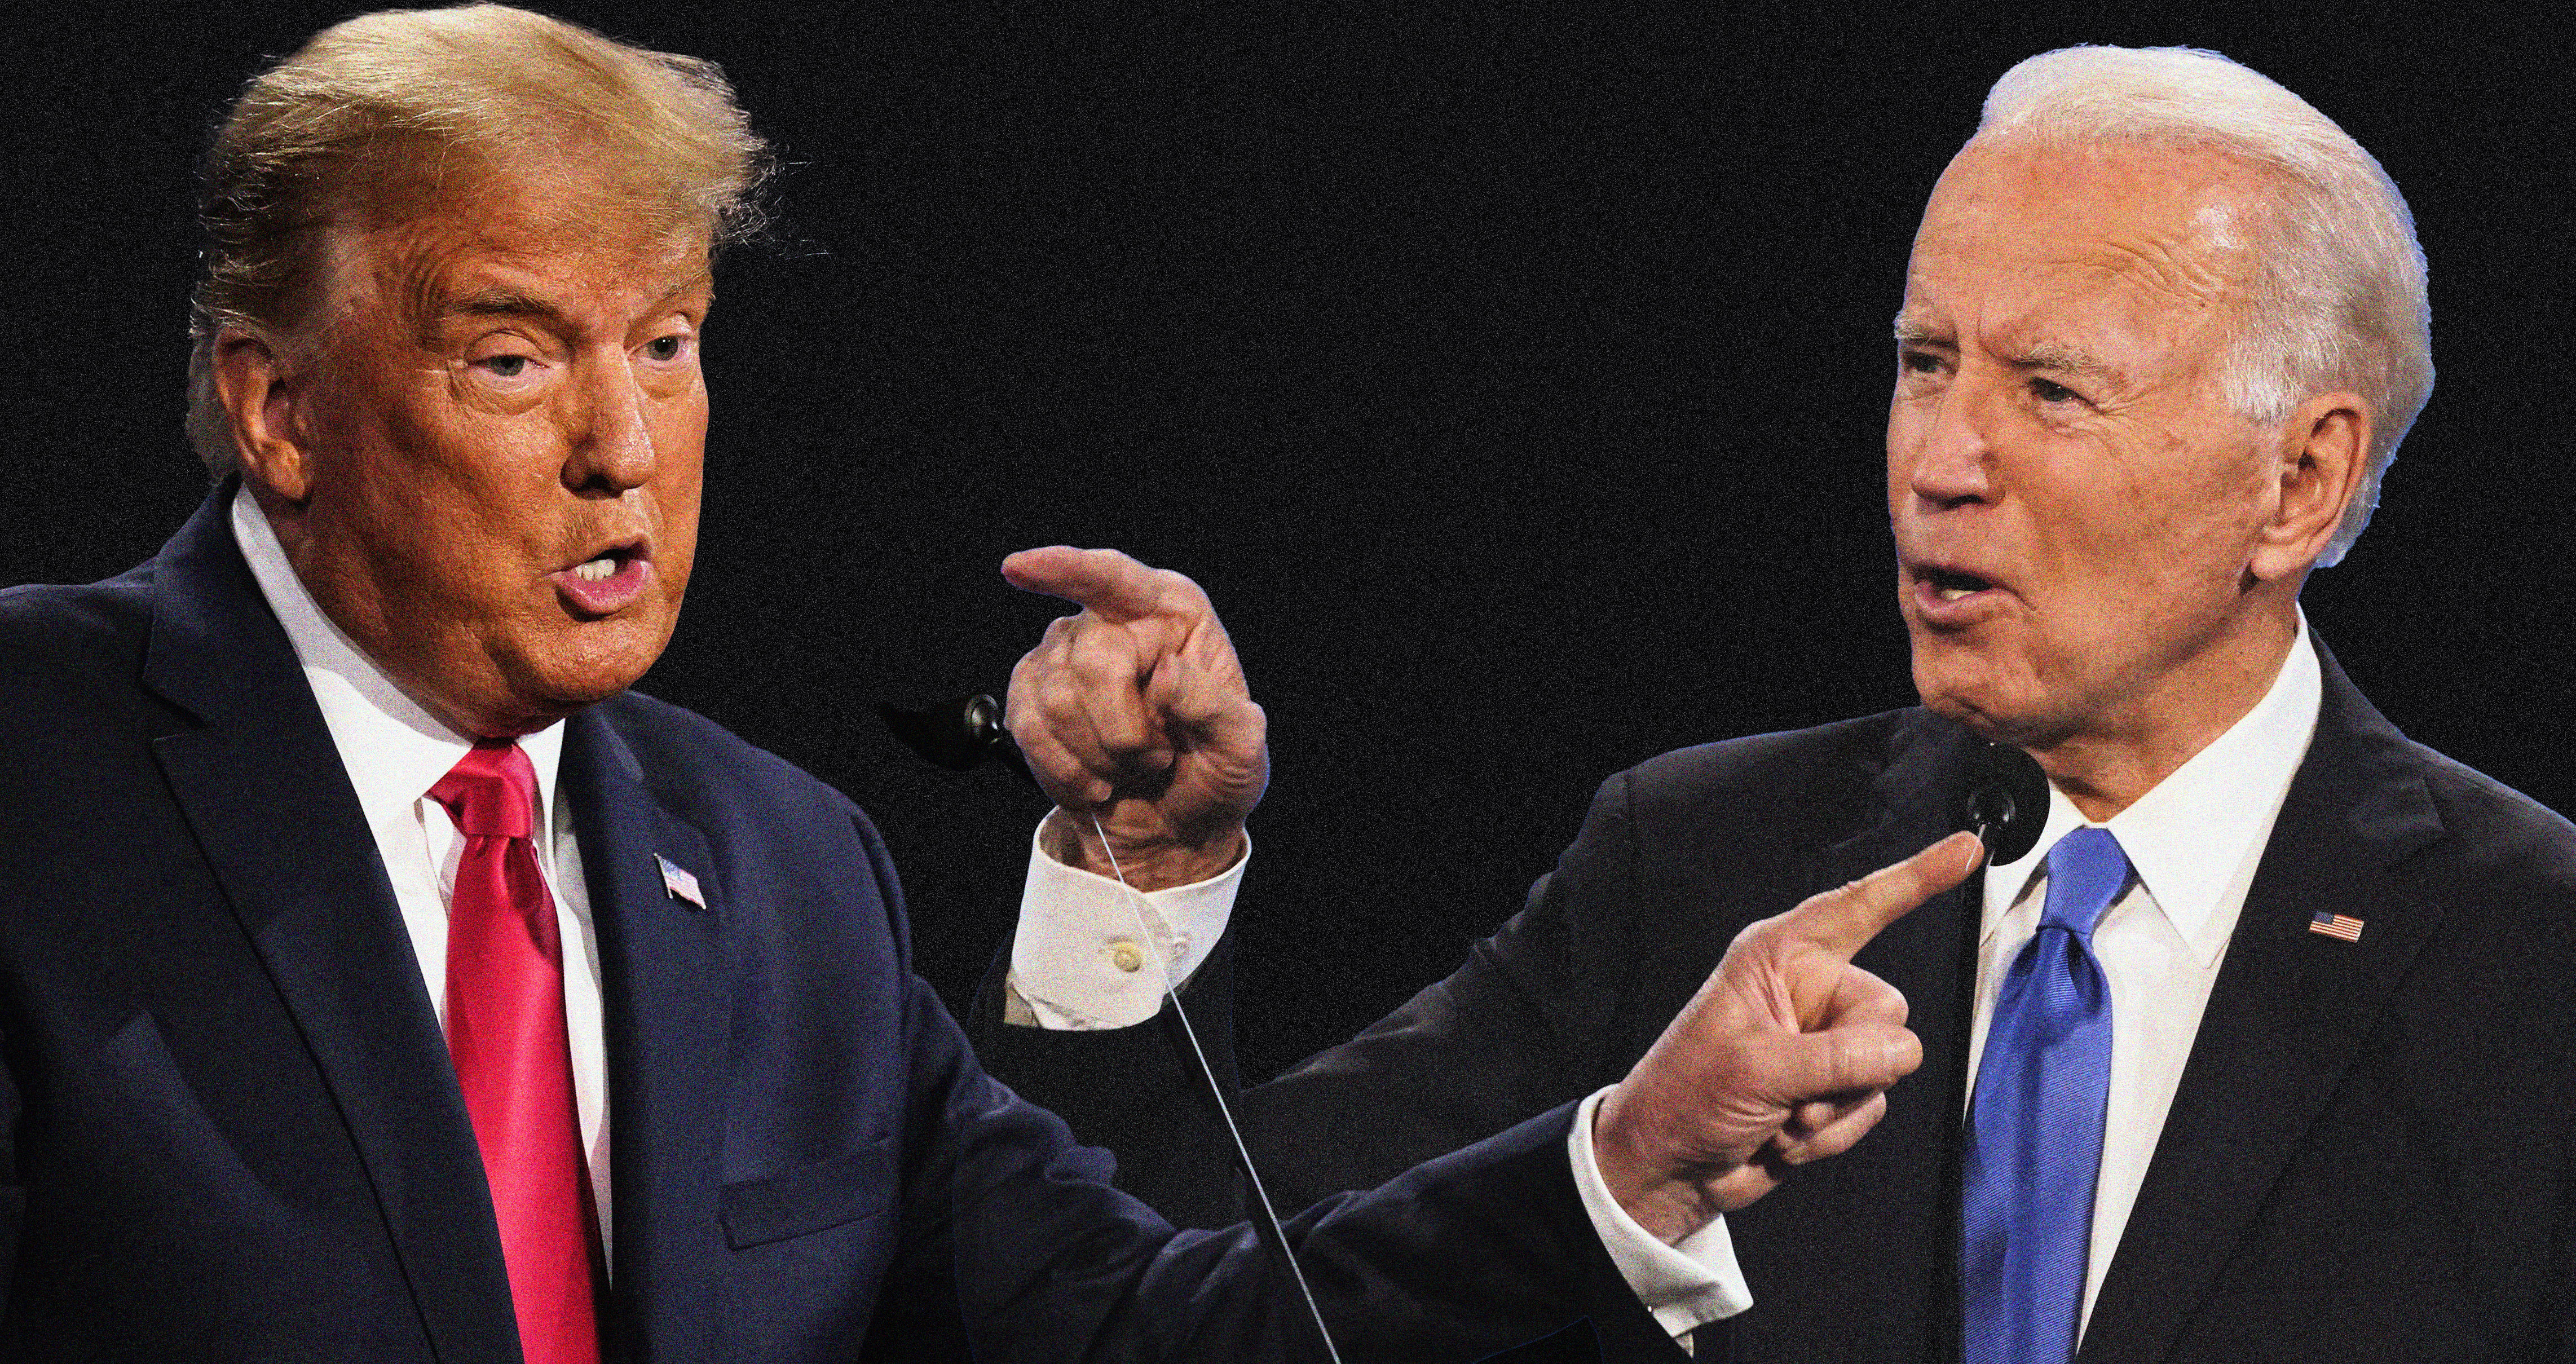 New Yahoo News/YouGov poll shows why Biden-Trump rematch is still neck and neck